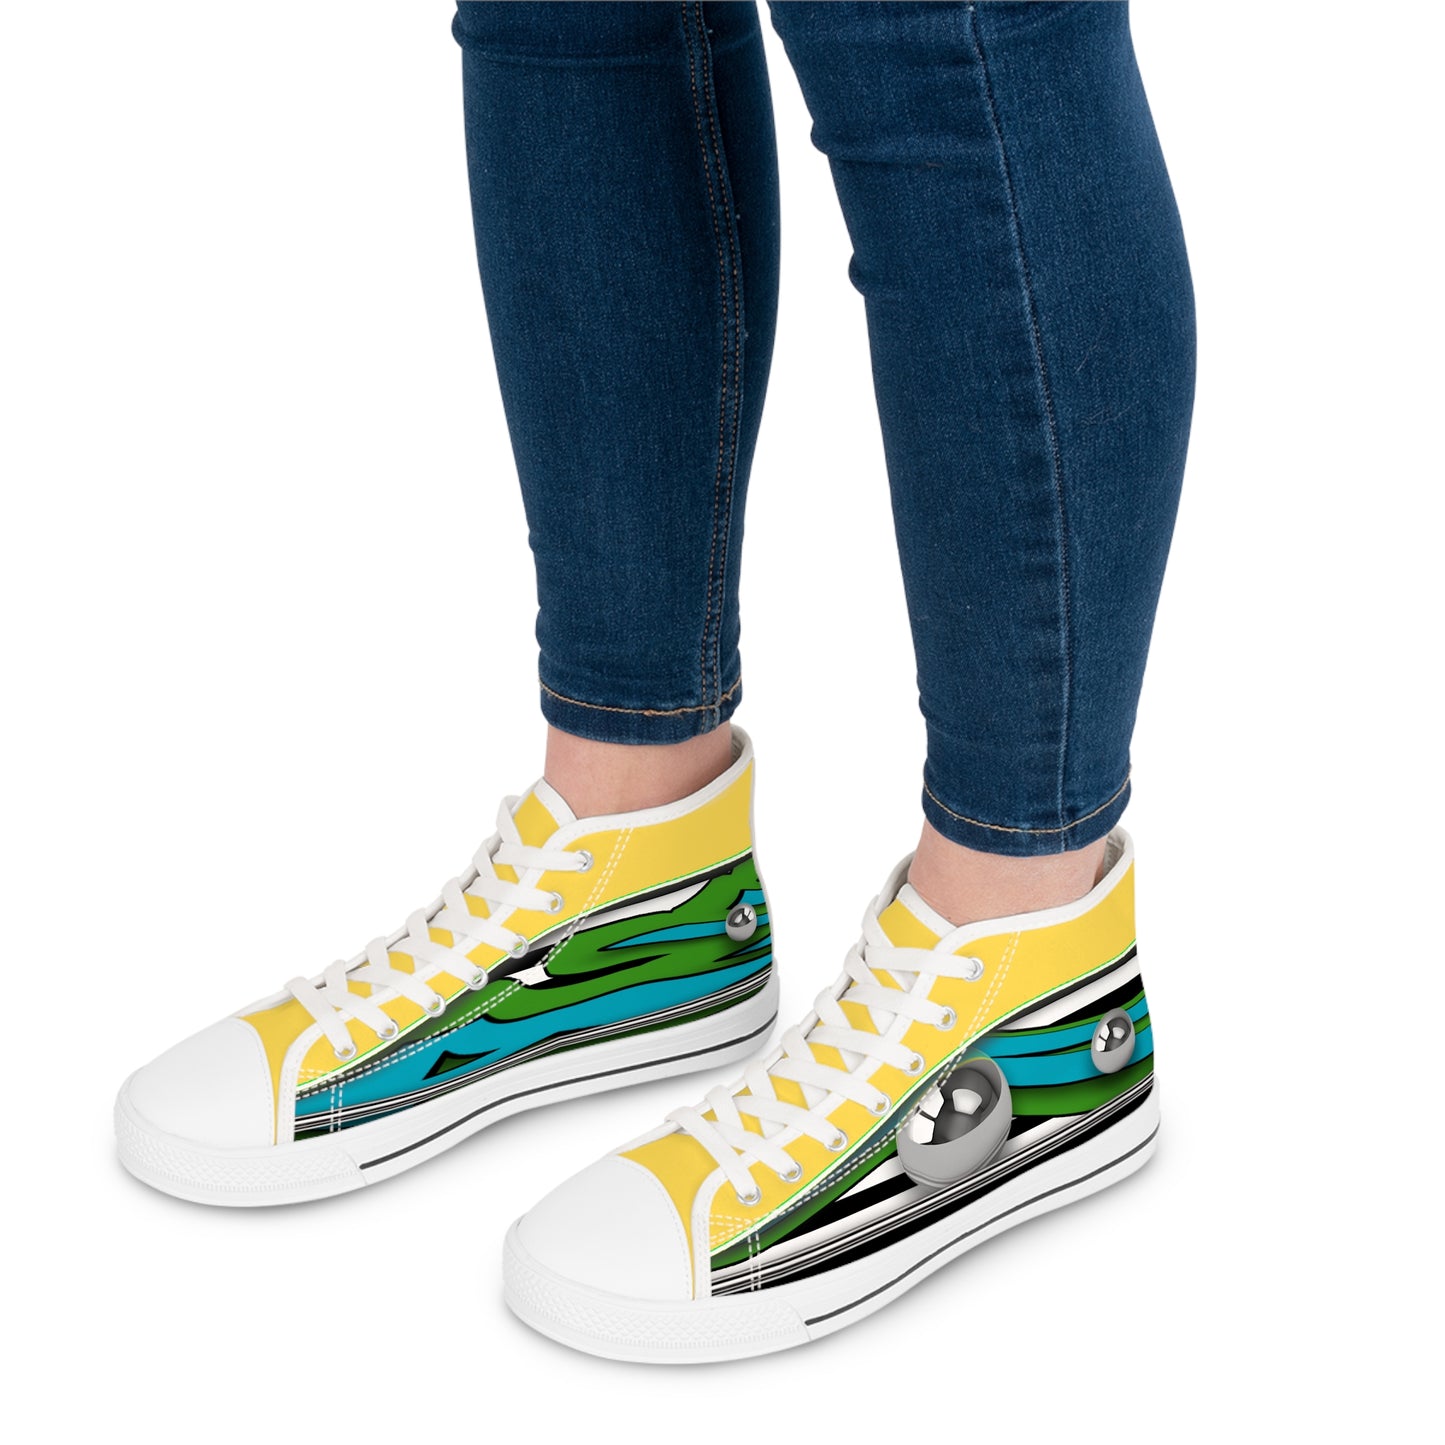 Women's High Top Graphics Sneakers - 10004 US 12 White sole